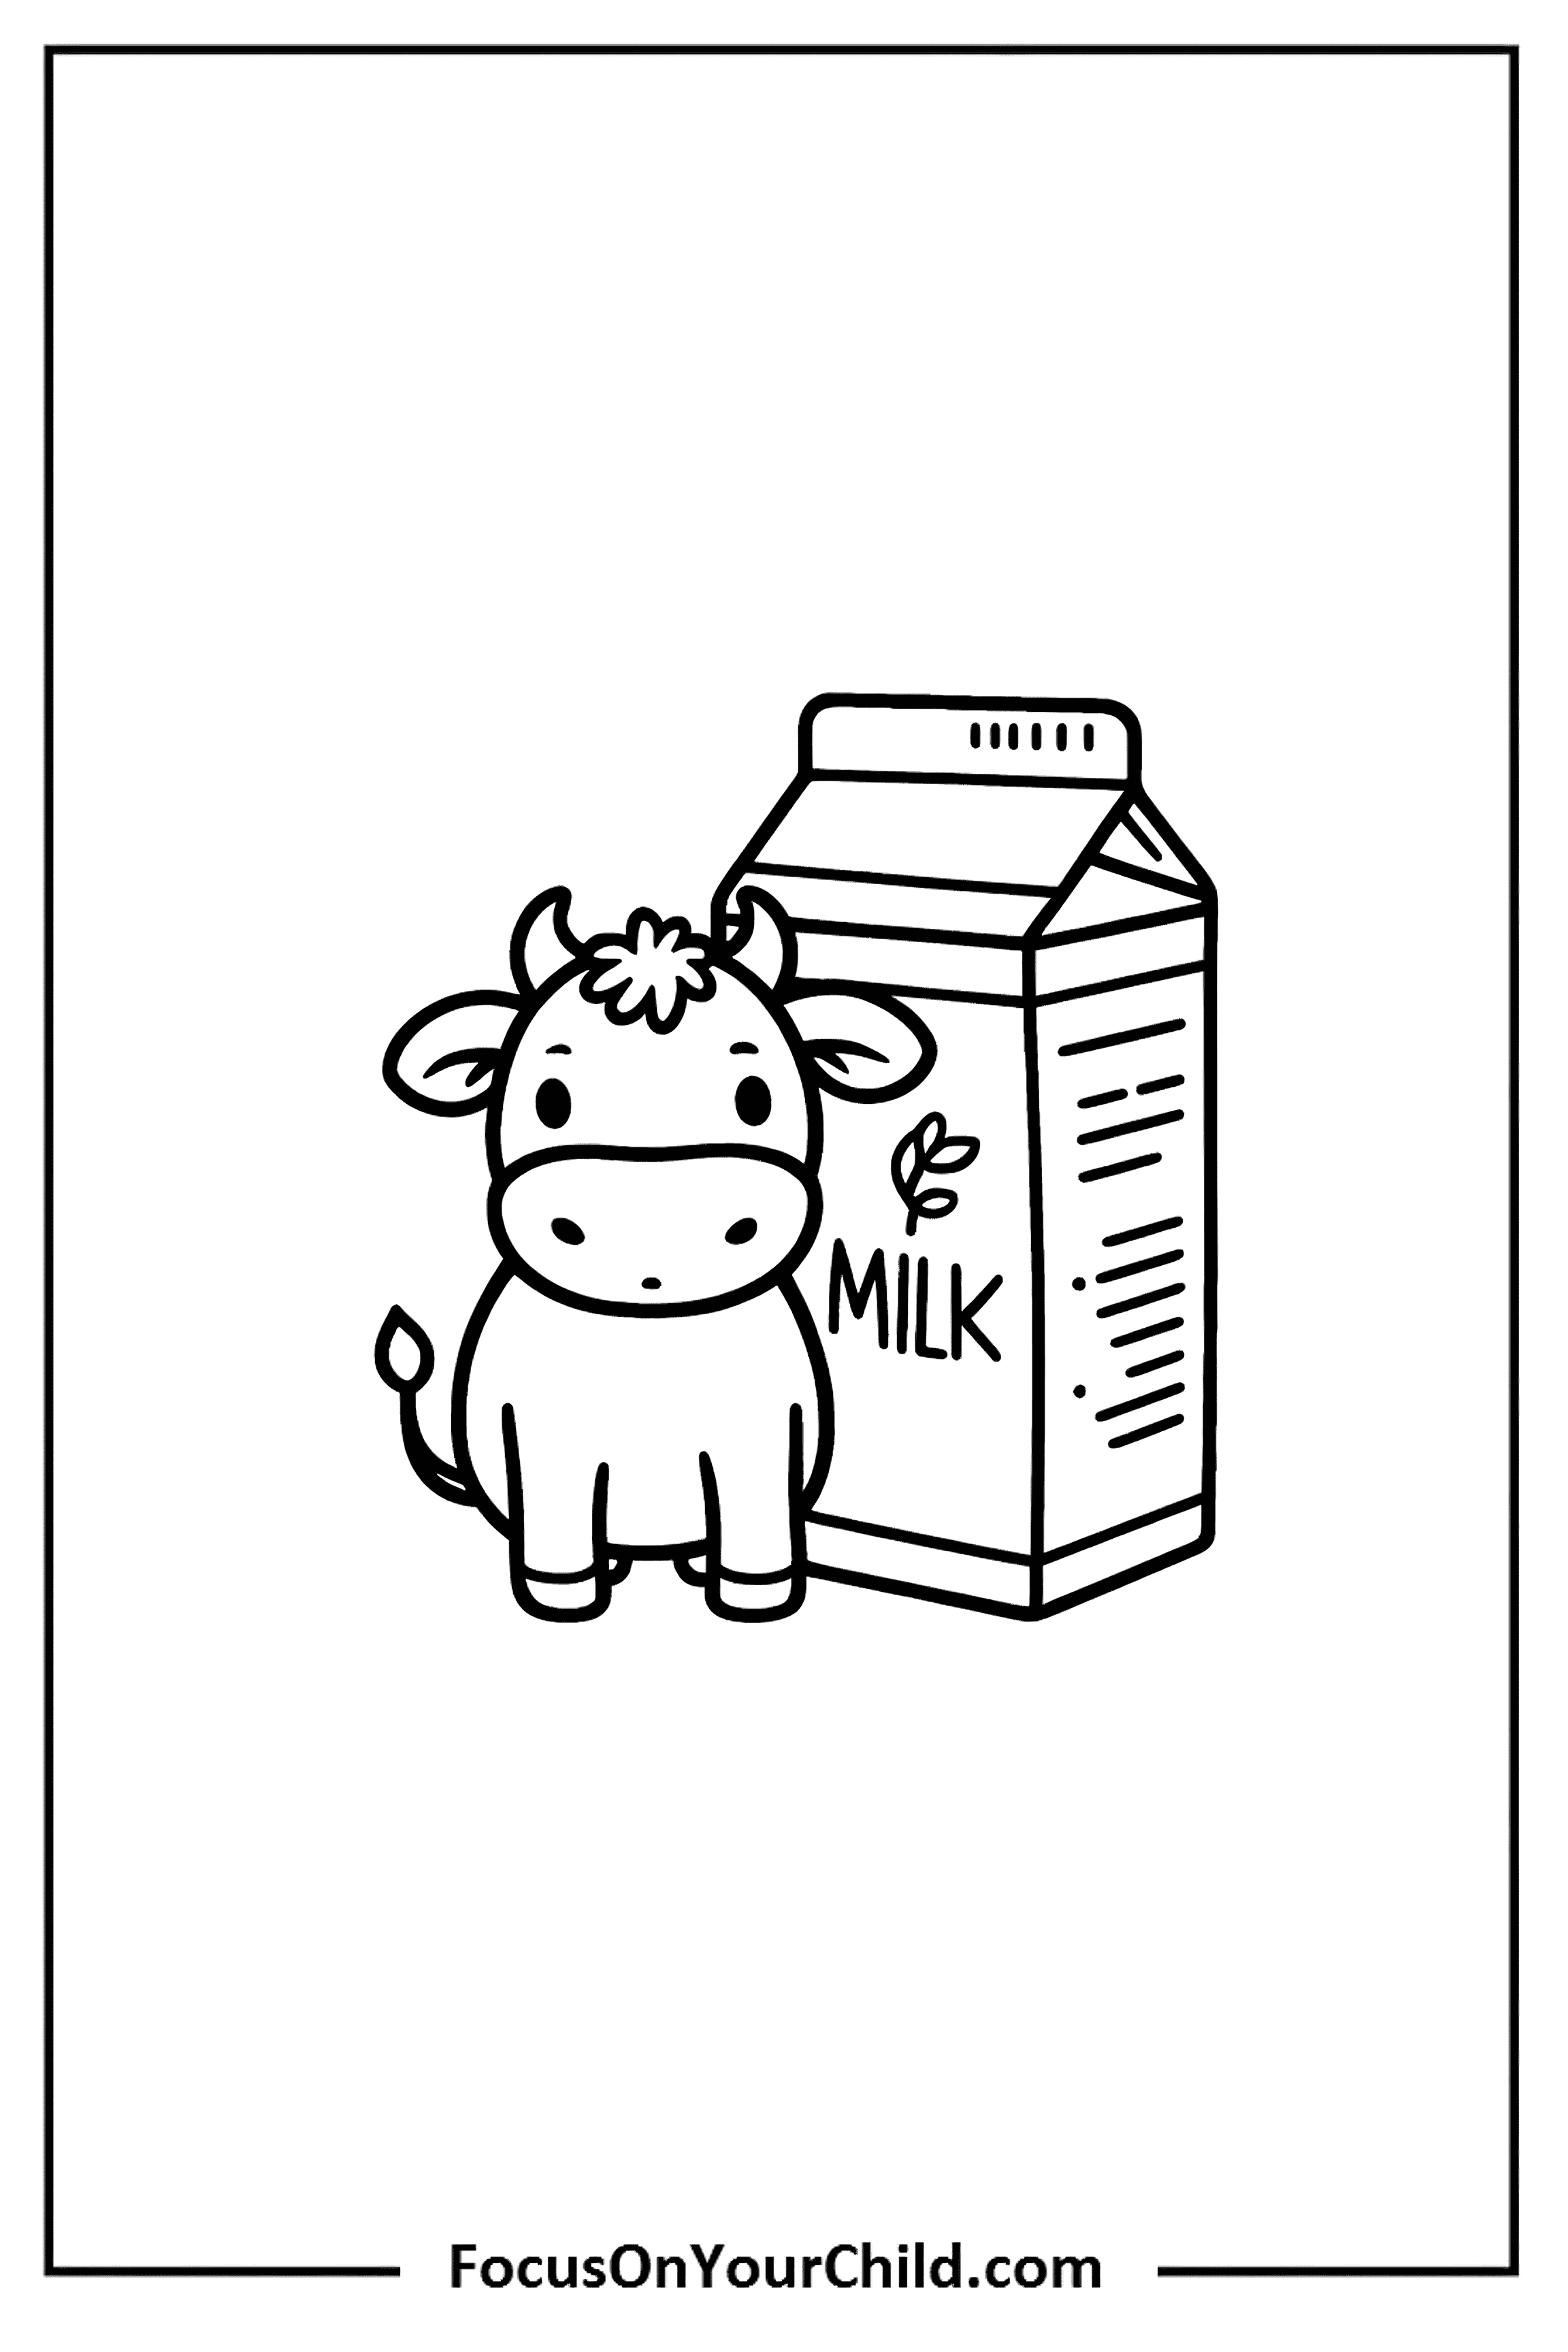 Adorable cow next to milk carton, perfect for kids educational materials.